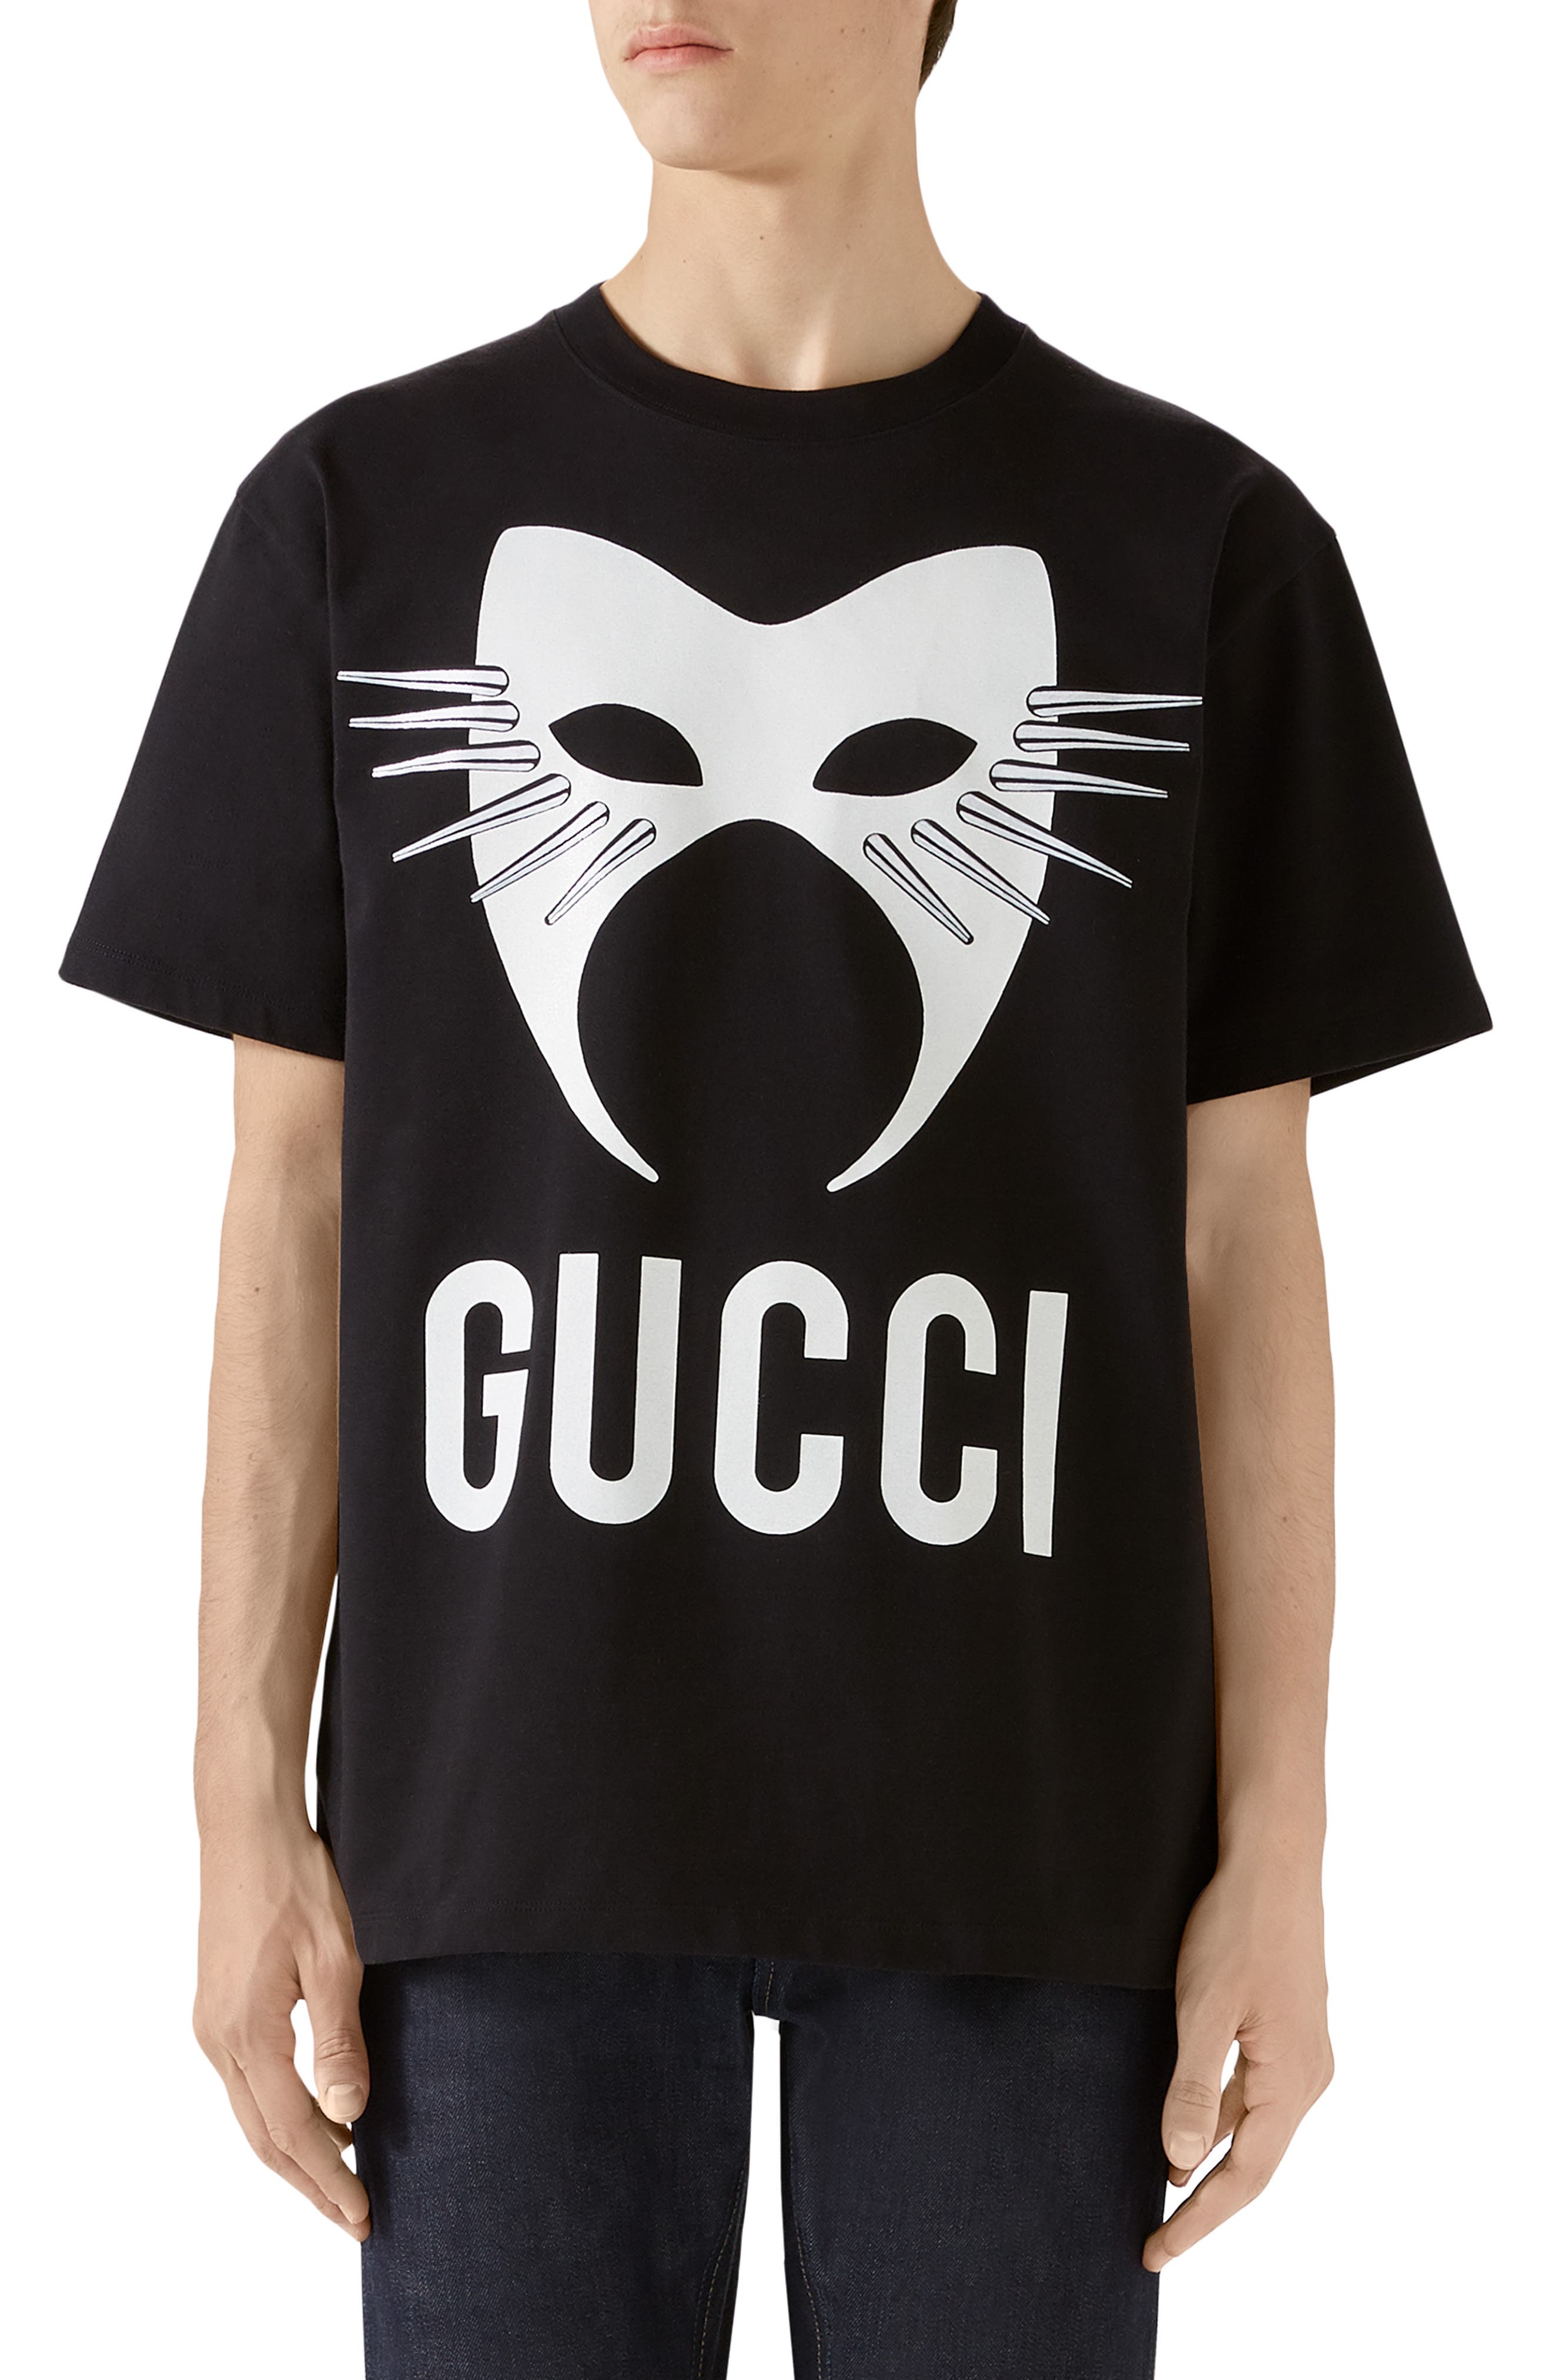 gucci graphic tees